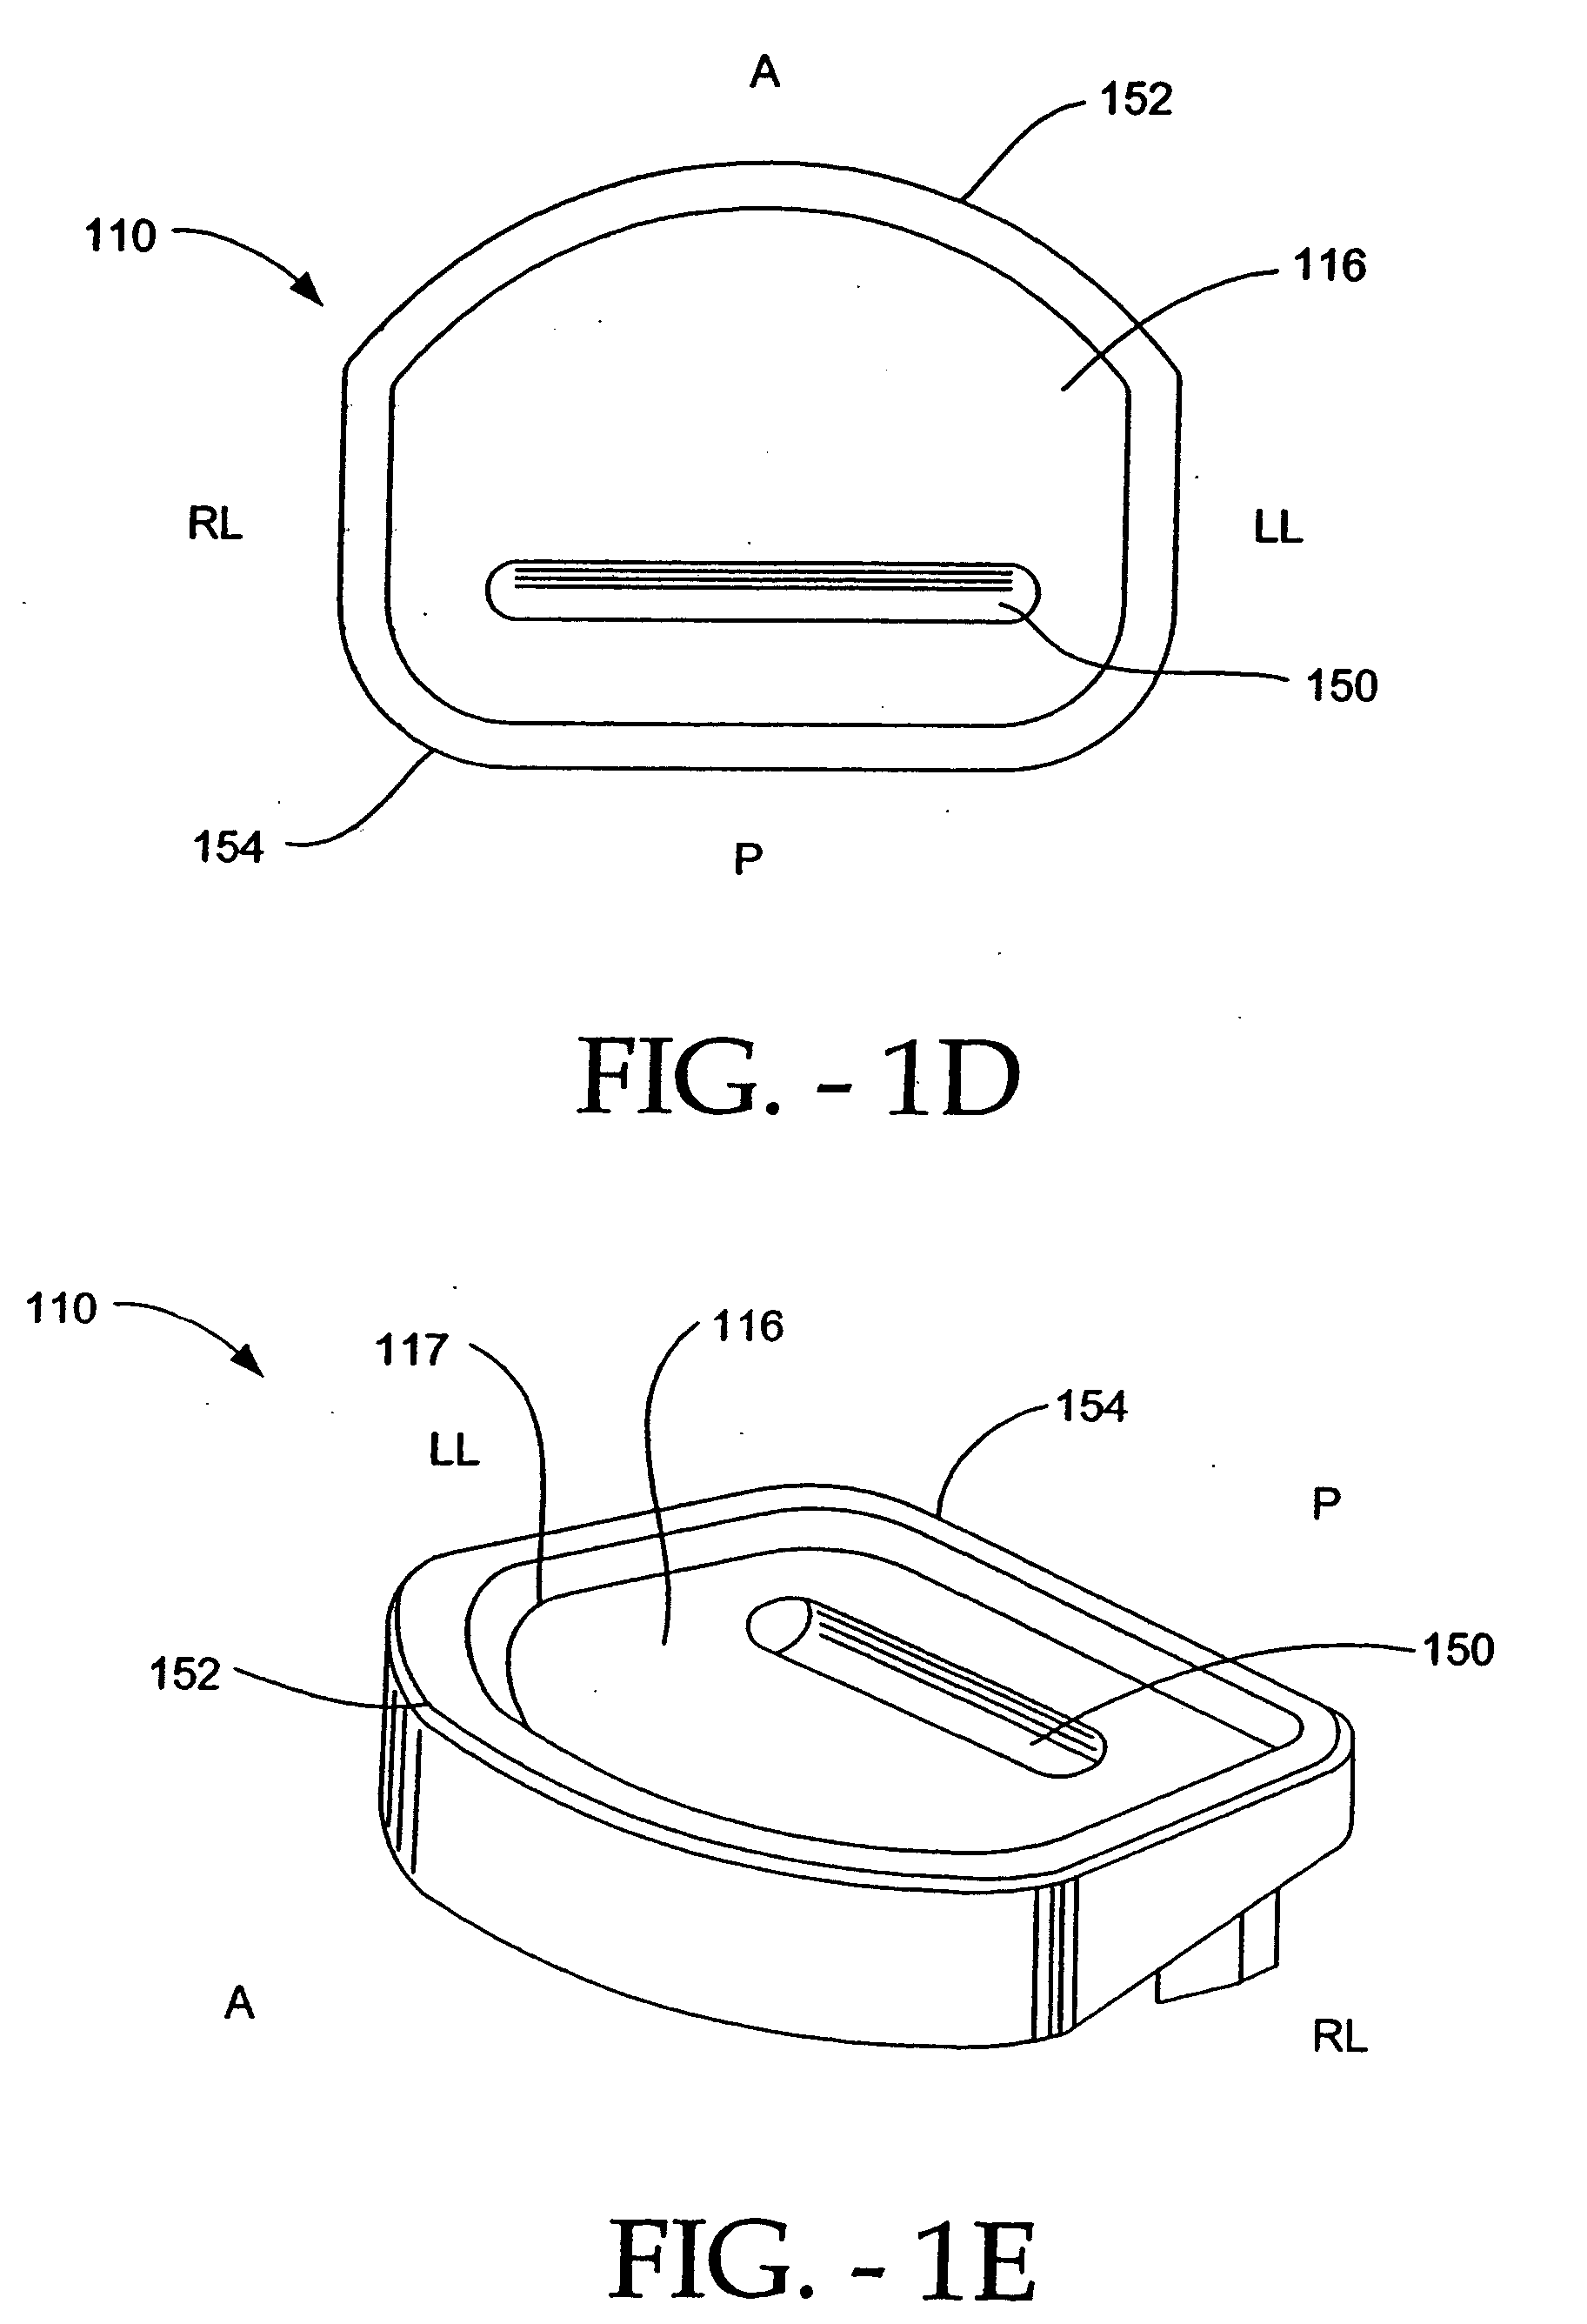 Method of laterally inserting an artificial vertebral disk replacement implant with crossbar spacer